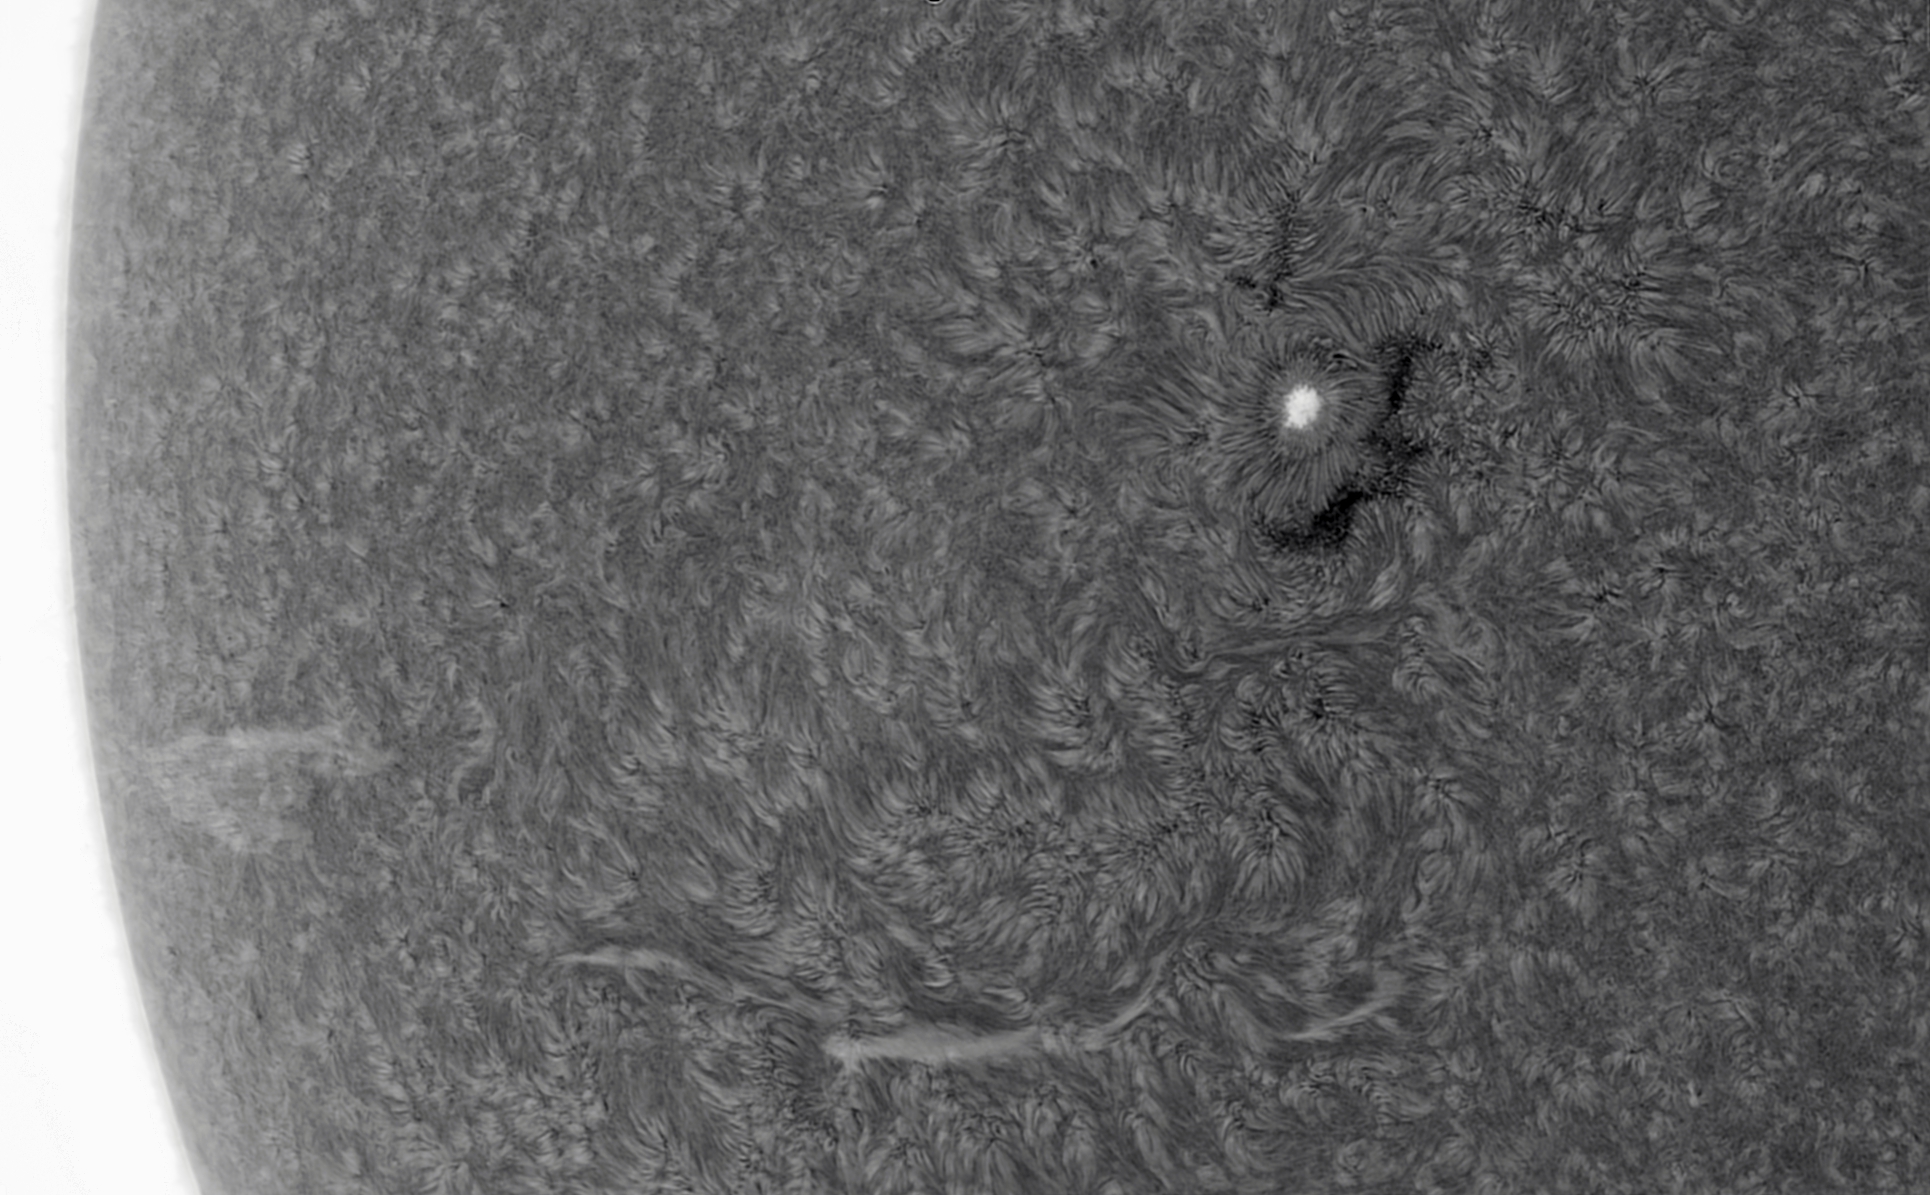 080019 AR2833 and filaments inverted.jpg